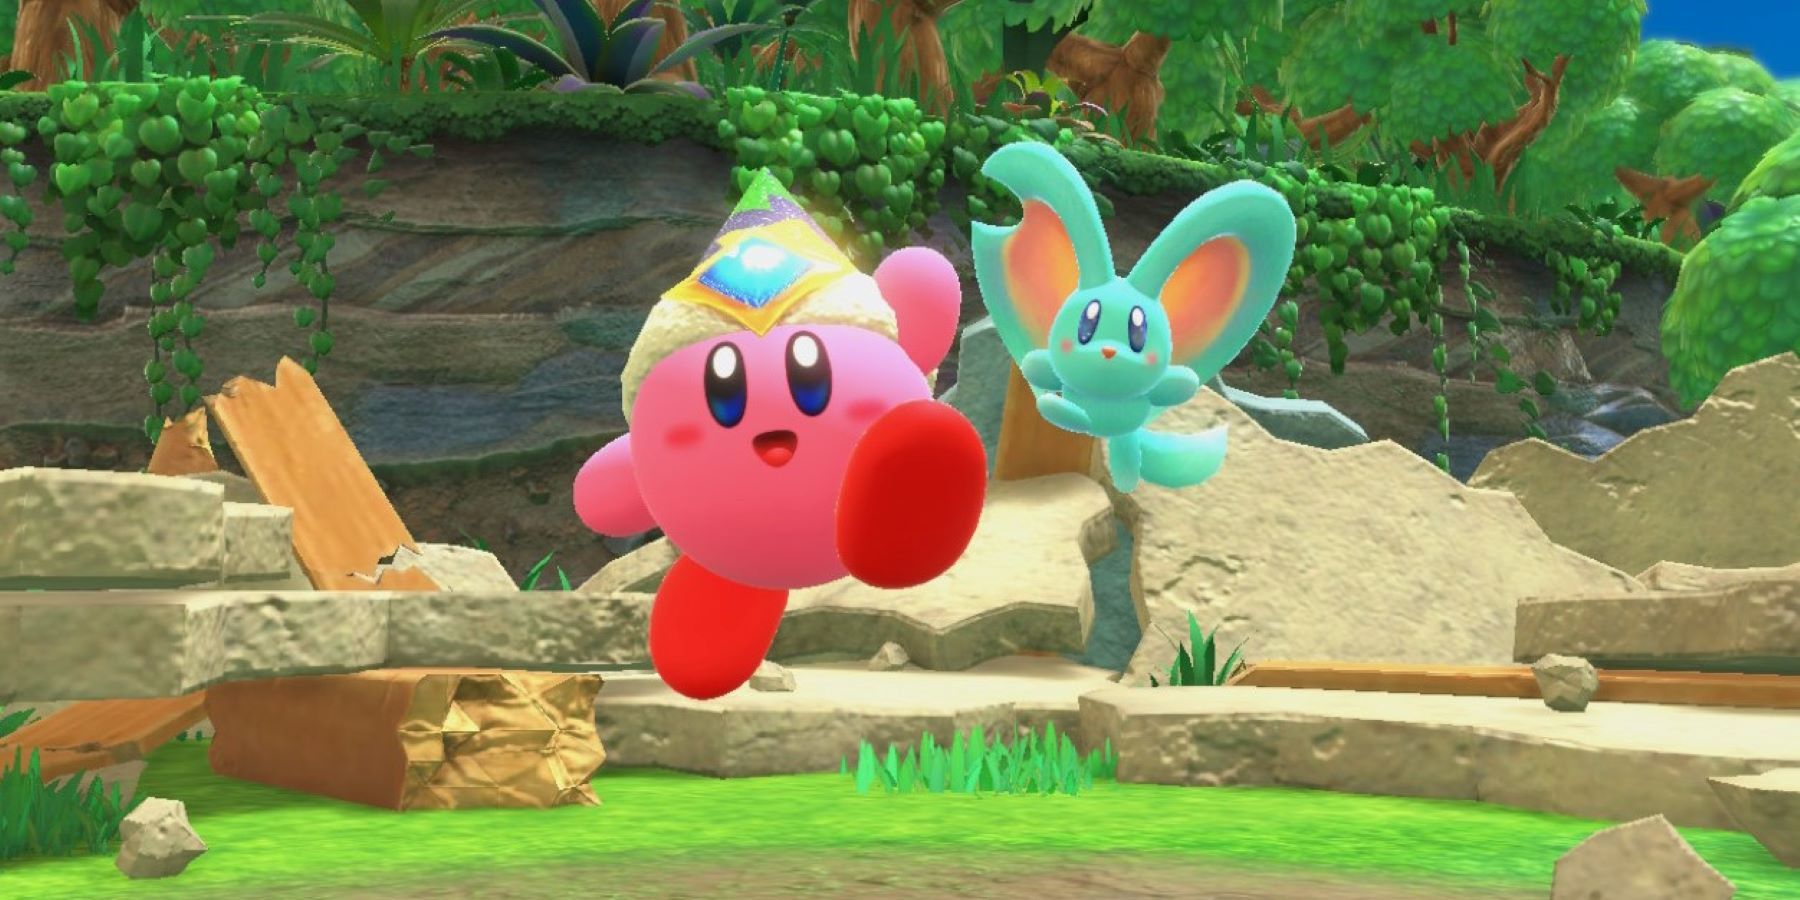 Elfilin and Bomb Kirby cheering in the Kirby and the Forgotten Land introduction